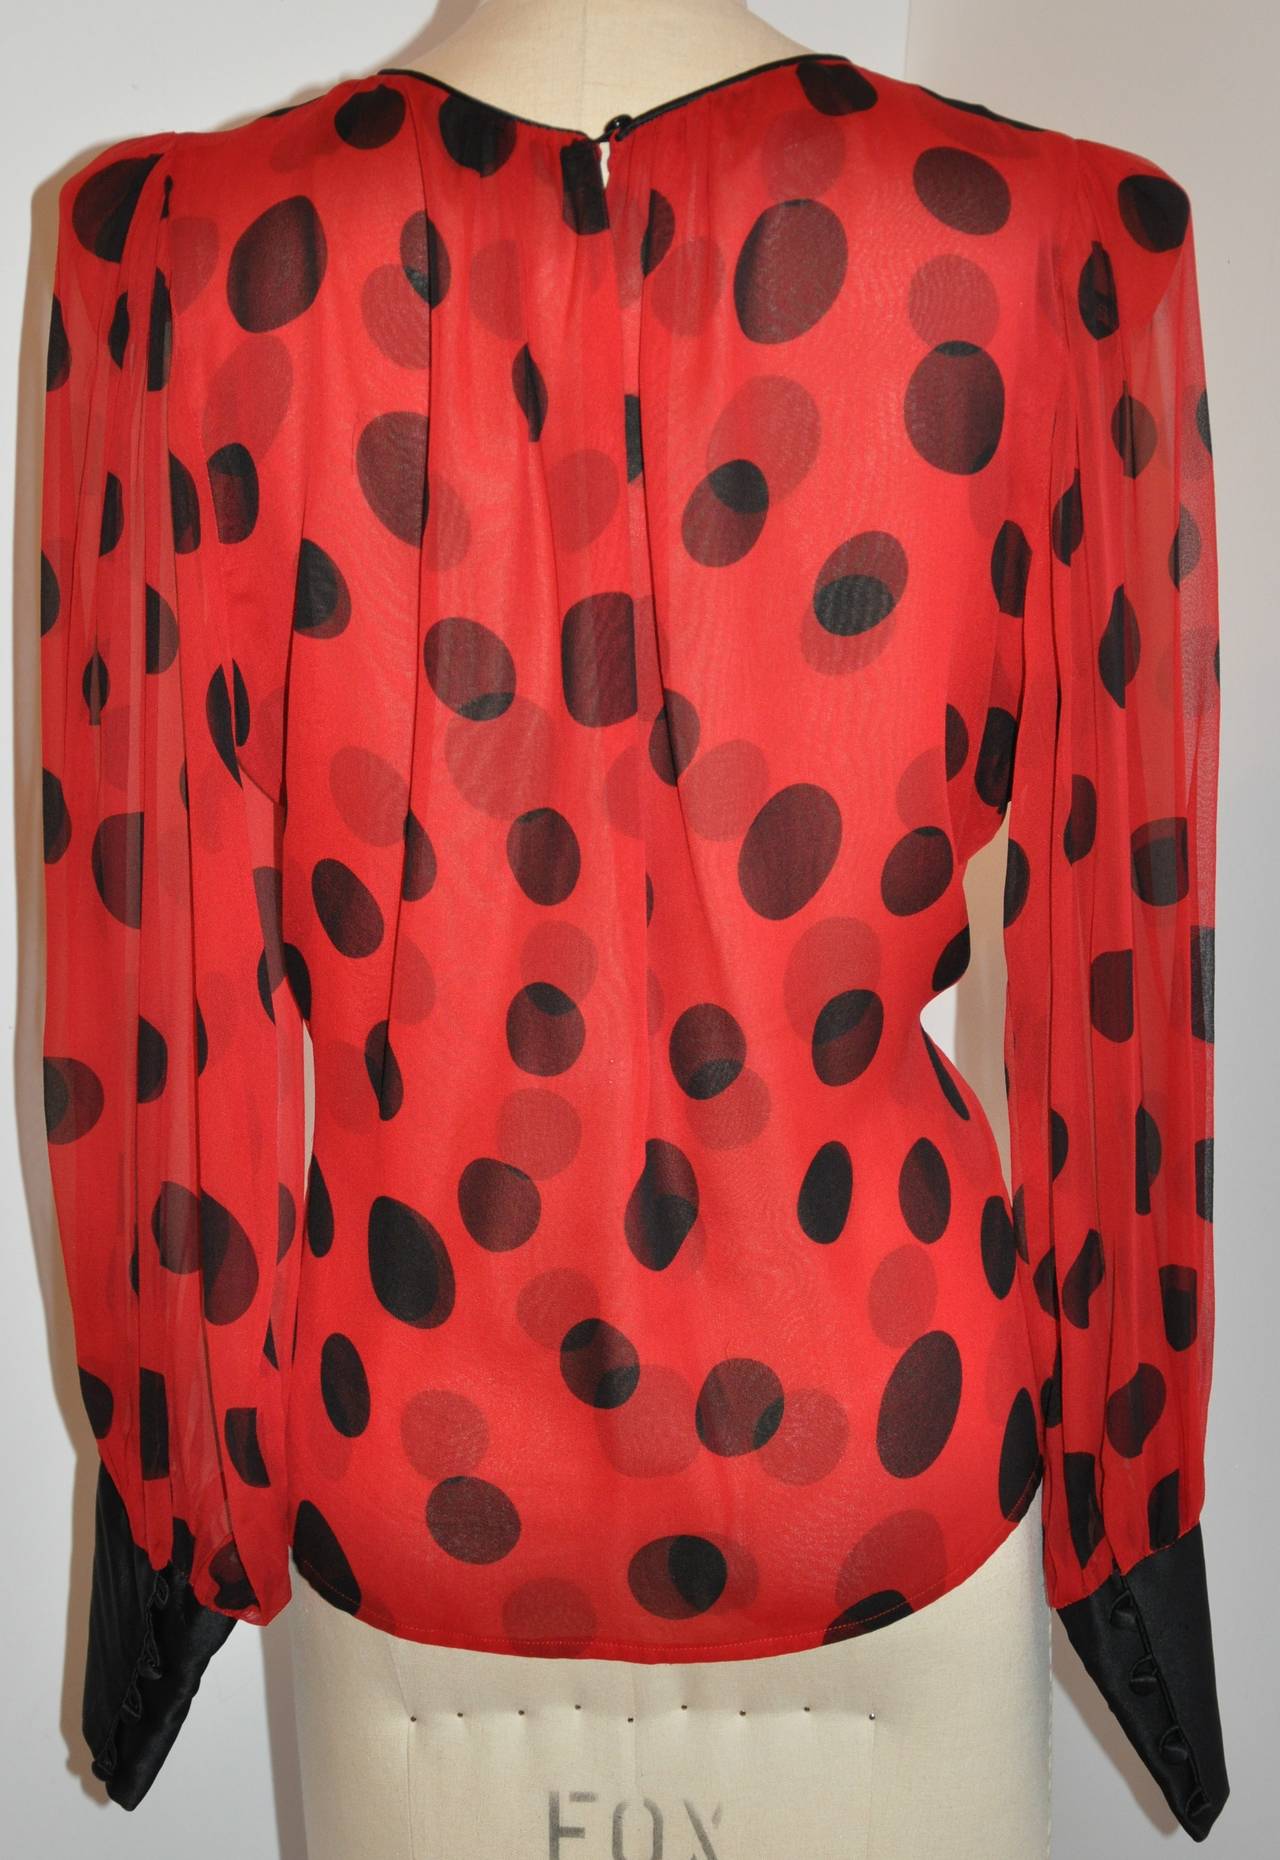 Flora Kung wonderfully detailed silk chiffon blouse is double-layered. Red with black polka dots, this wonderful blouse is accented with black silk crepe de chine piping along the neckline and the sleeve's cuffs. The cuffs has four silk covered